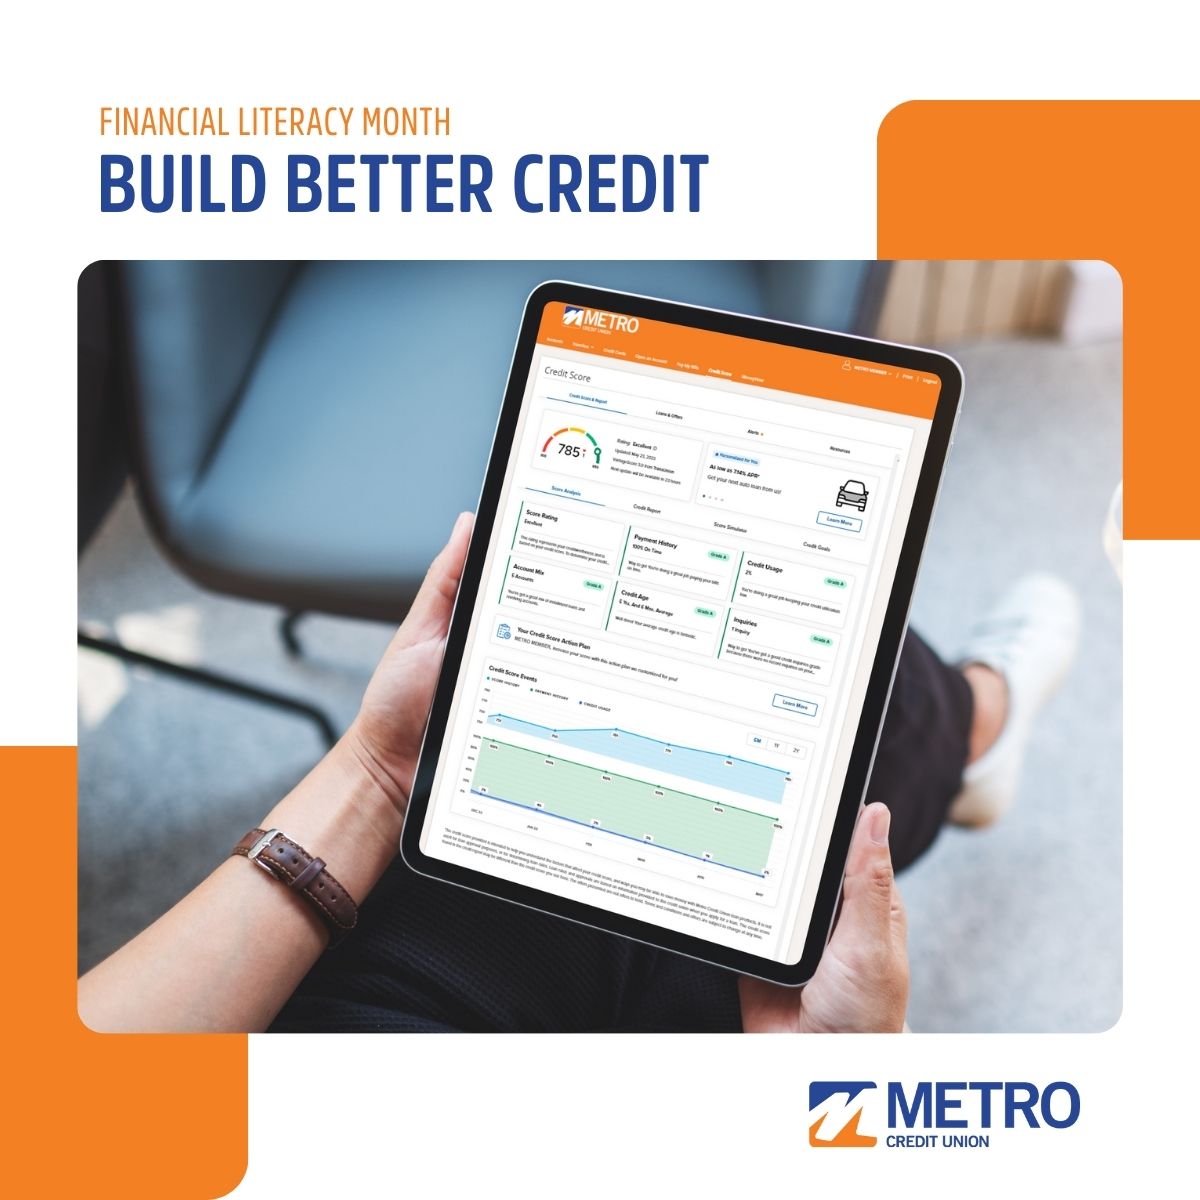 How can using #credit wisely help you reach your #financialgoals? Check out Metro’s resources on the ins and outs of credit here: ow.ly/Bjpl50Rnq1M #financialliteracy